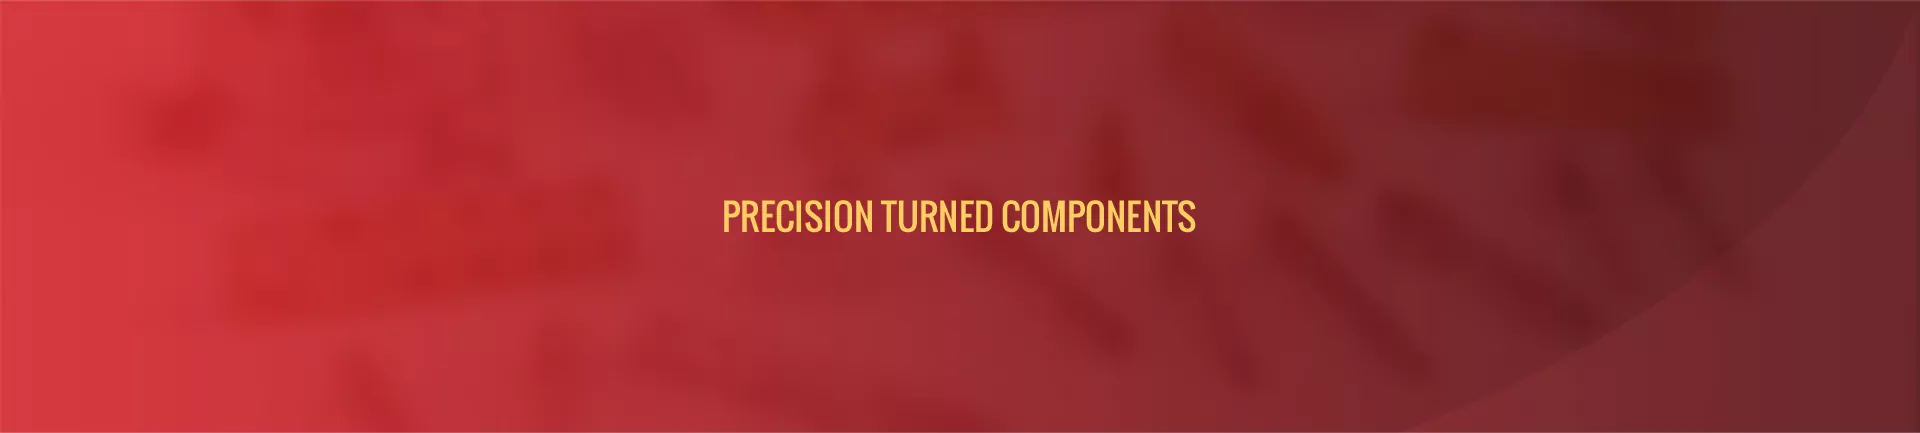 brass-precision-turned-components-banner